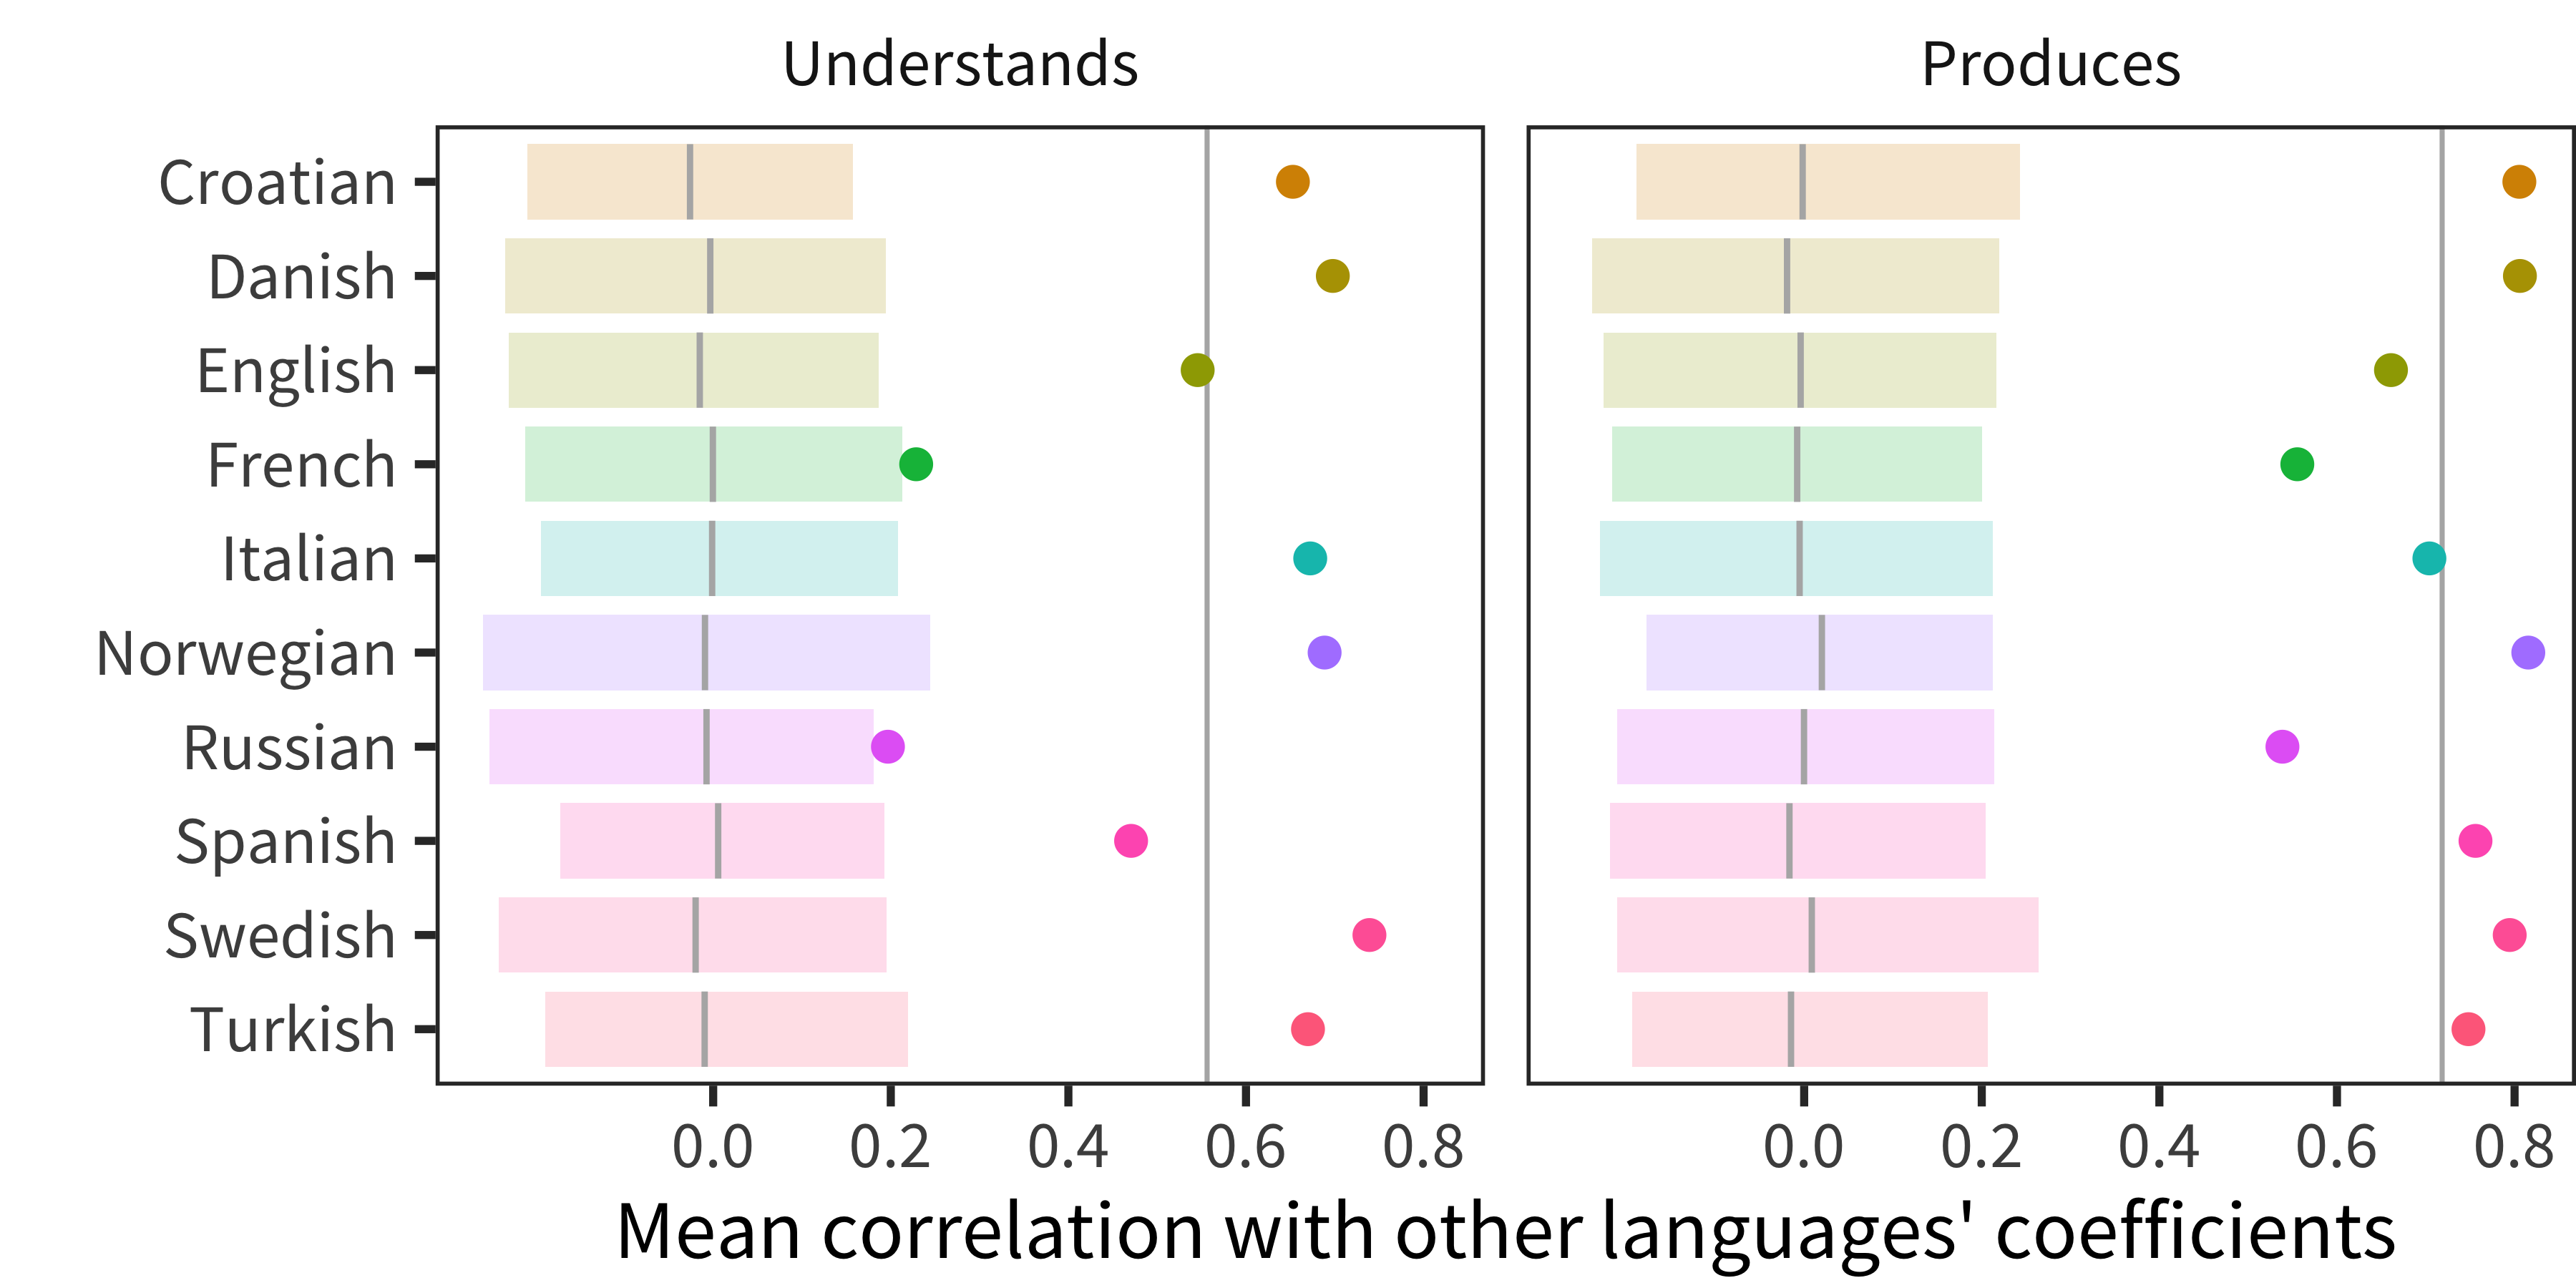 Correlations of coefficient estimates between languages. Each point represents the mean of one language's coefficients' correlation with each other language's coefficients, with the vertical line indicating the overall mean across languages. The shaded region and line show a bootstrapped 95\% confidence interval of a randomized baseline where predictor coefficients are shuffled within language.